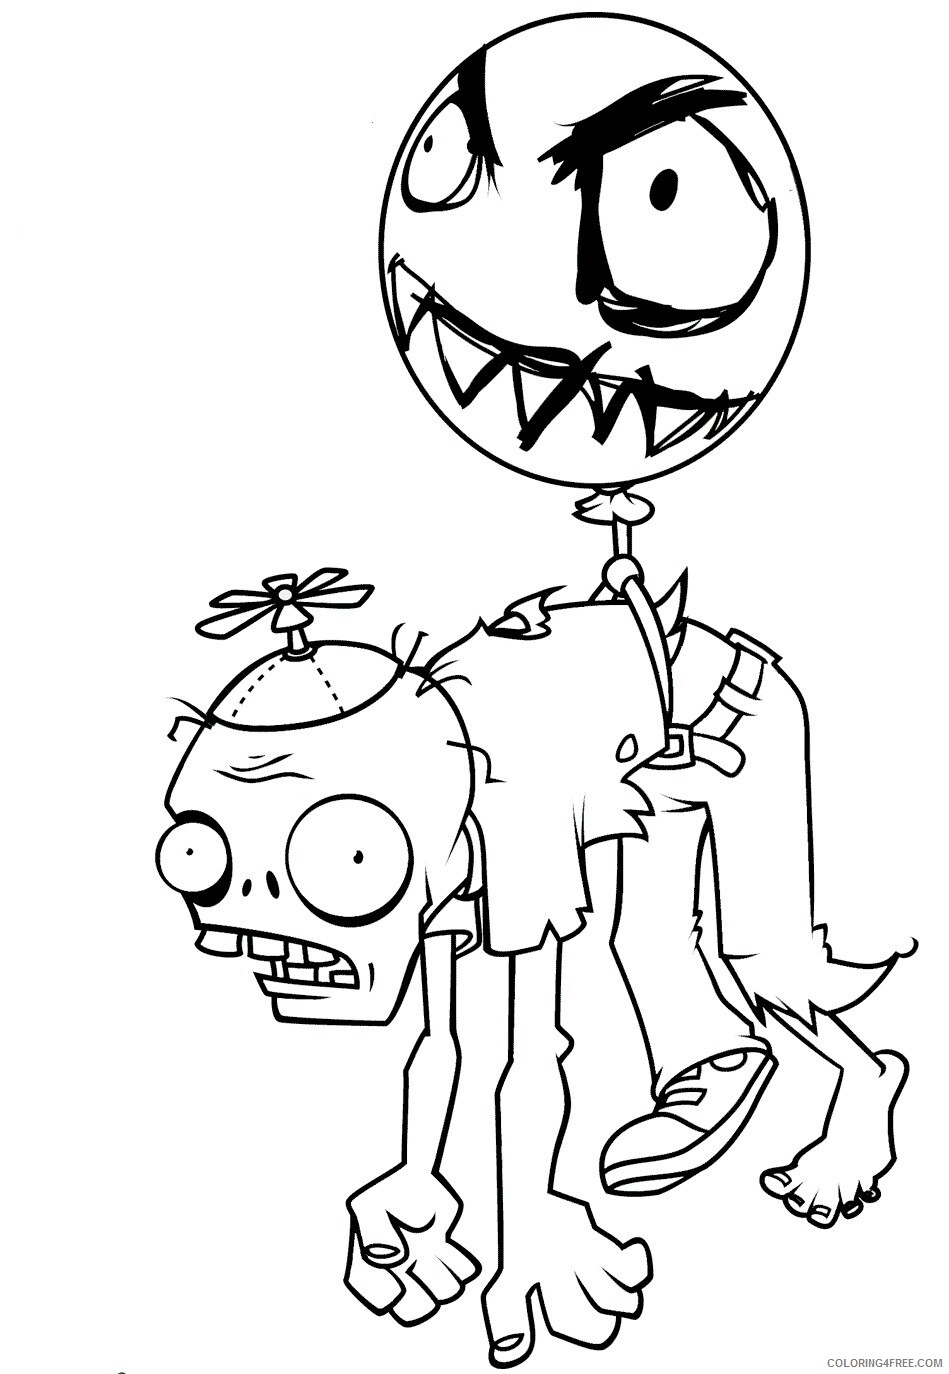 Plants vs Zombies Coloring Pages Games balloon zombie Printable 2021 0809 Coloring4free